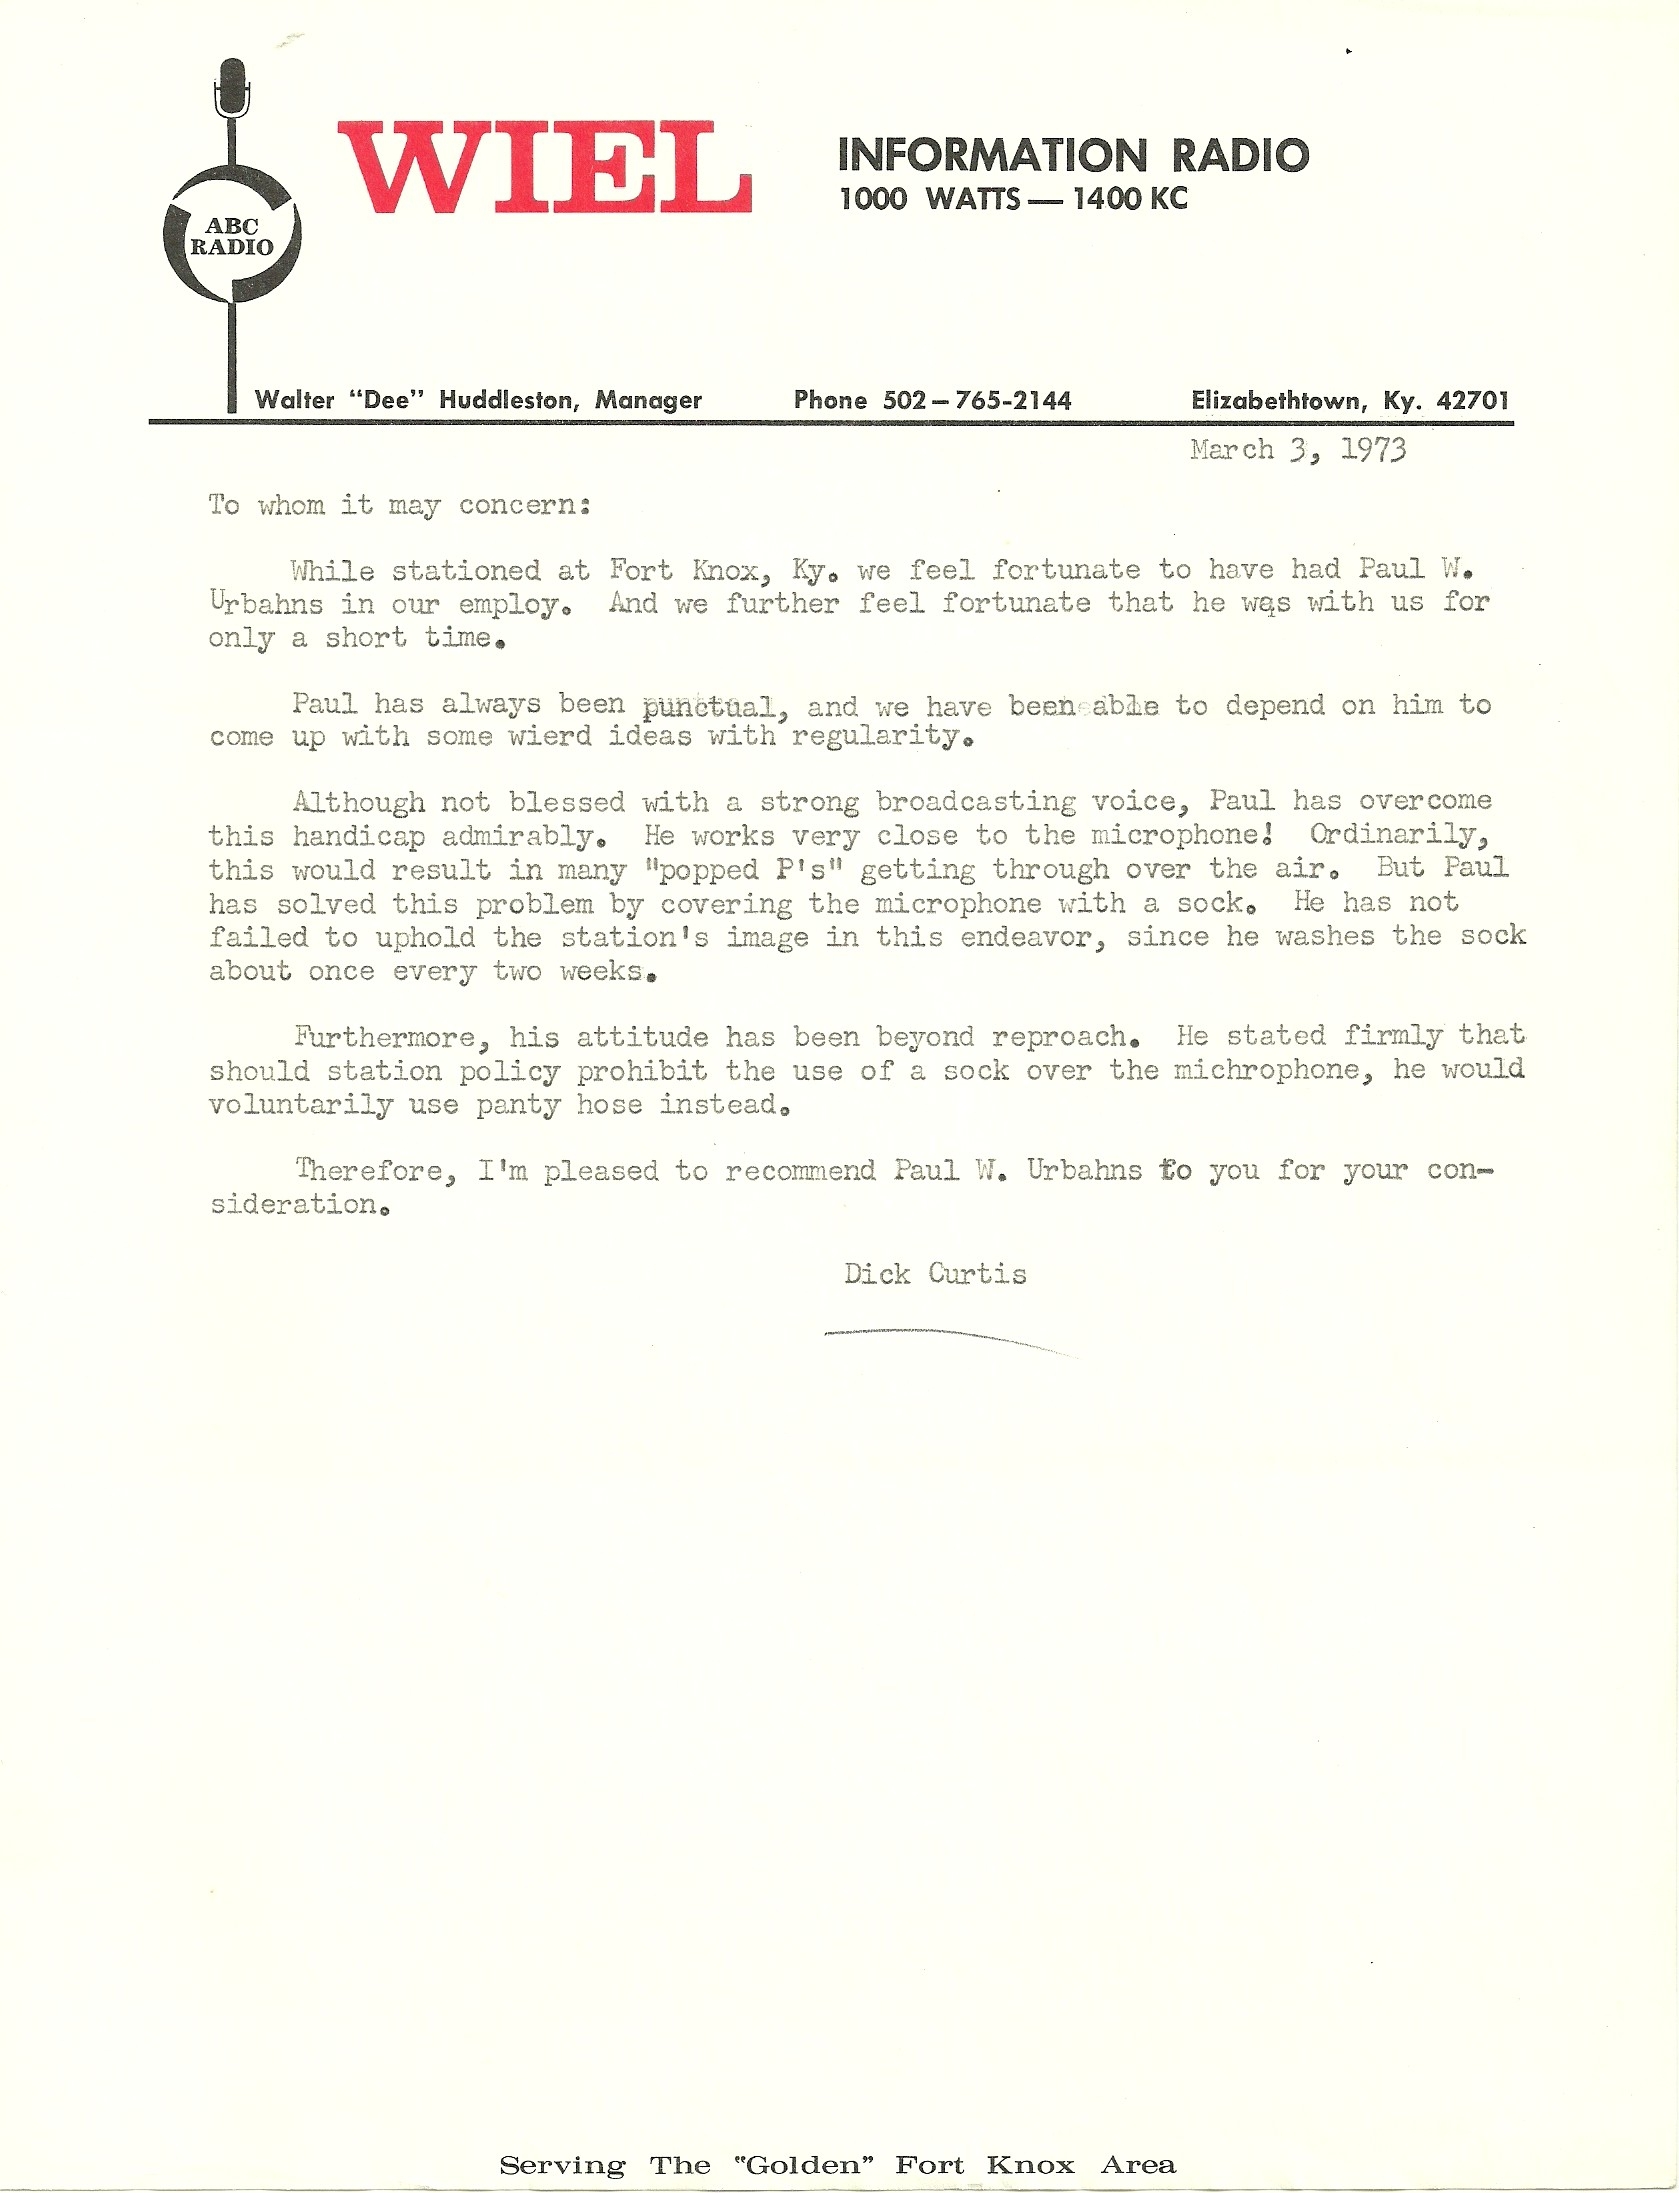 Dick Curtis Letter for Paul